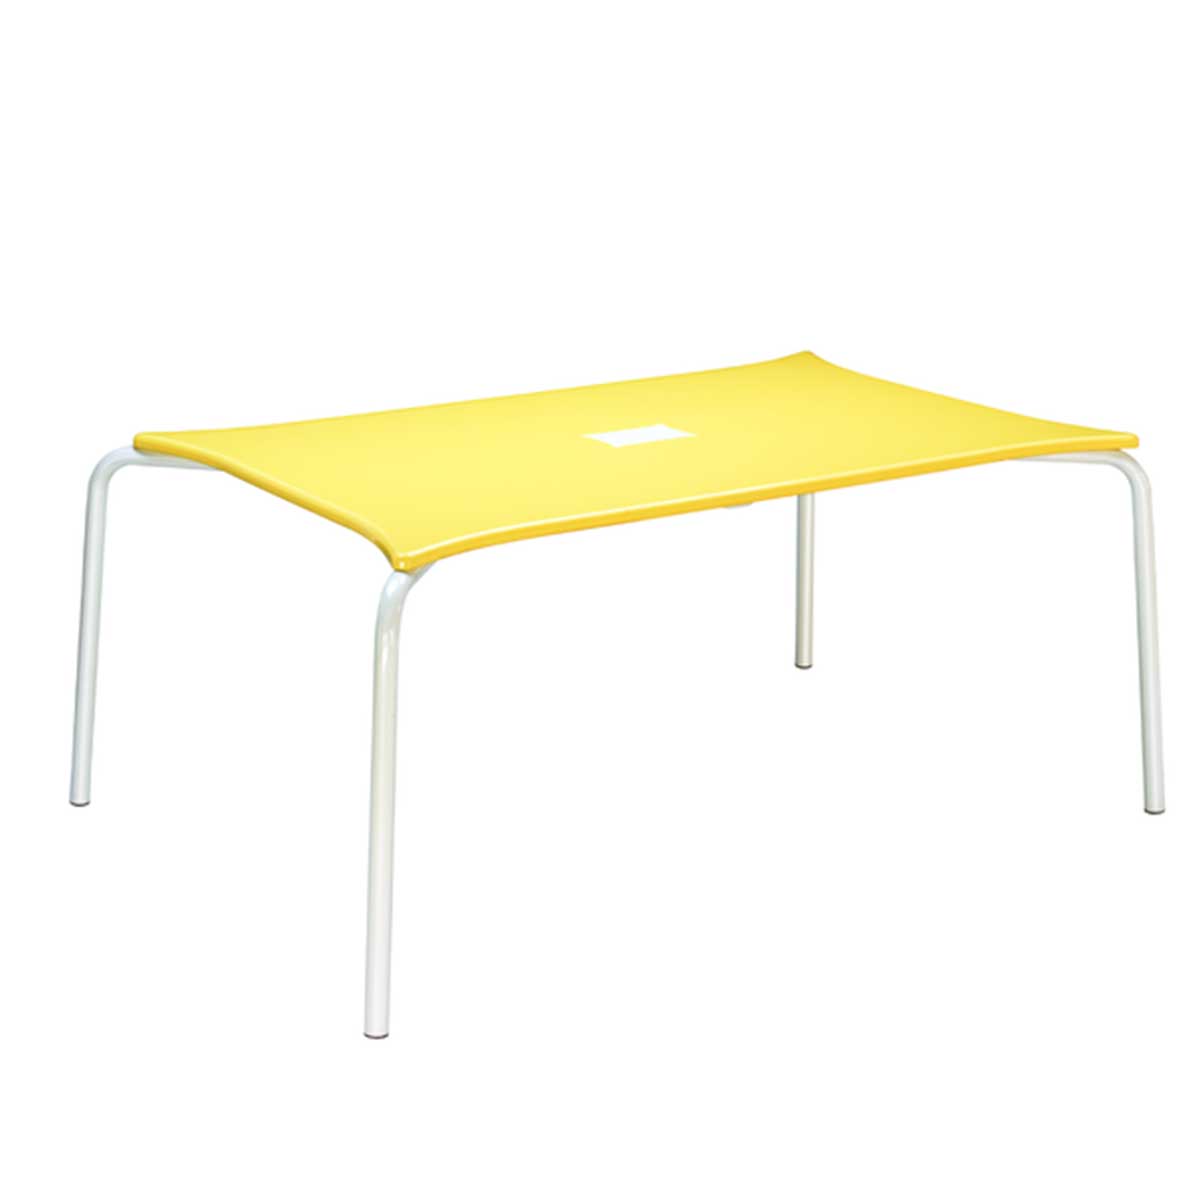 Cafeteria Table Manufacturers, Suppliers in Bhogal